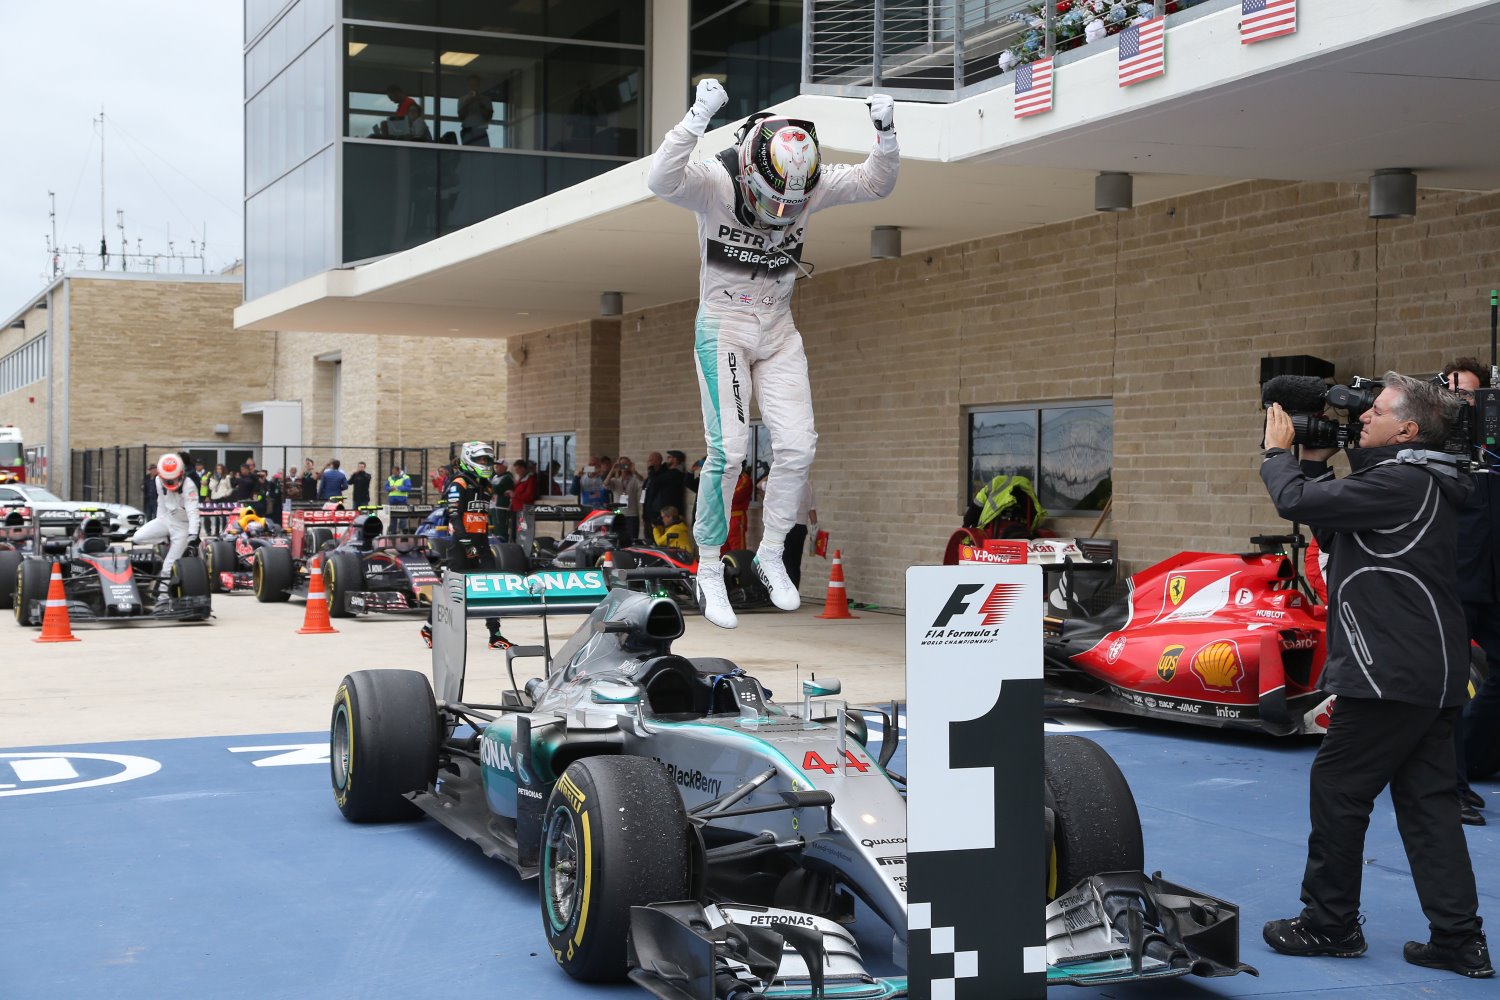 With the Mercedes HP advantage there is no stopping Hamilton